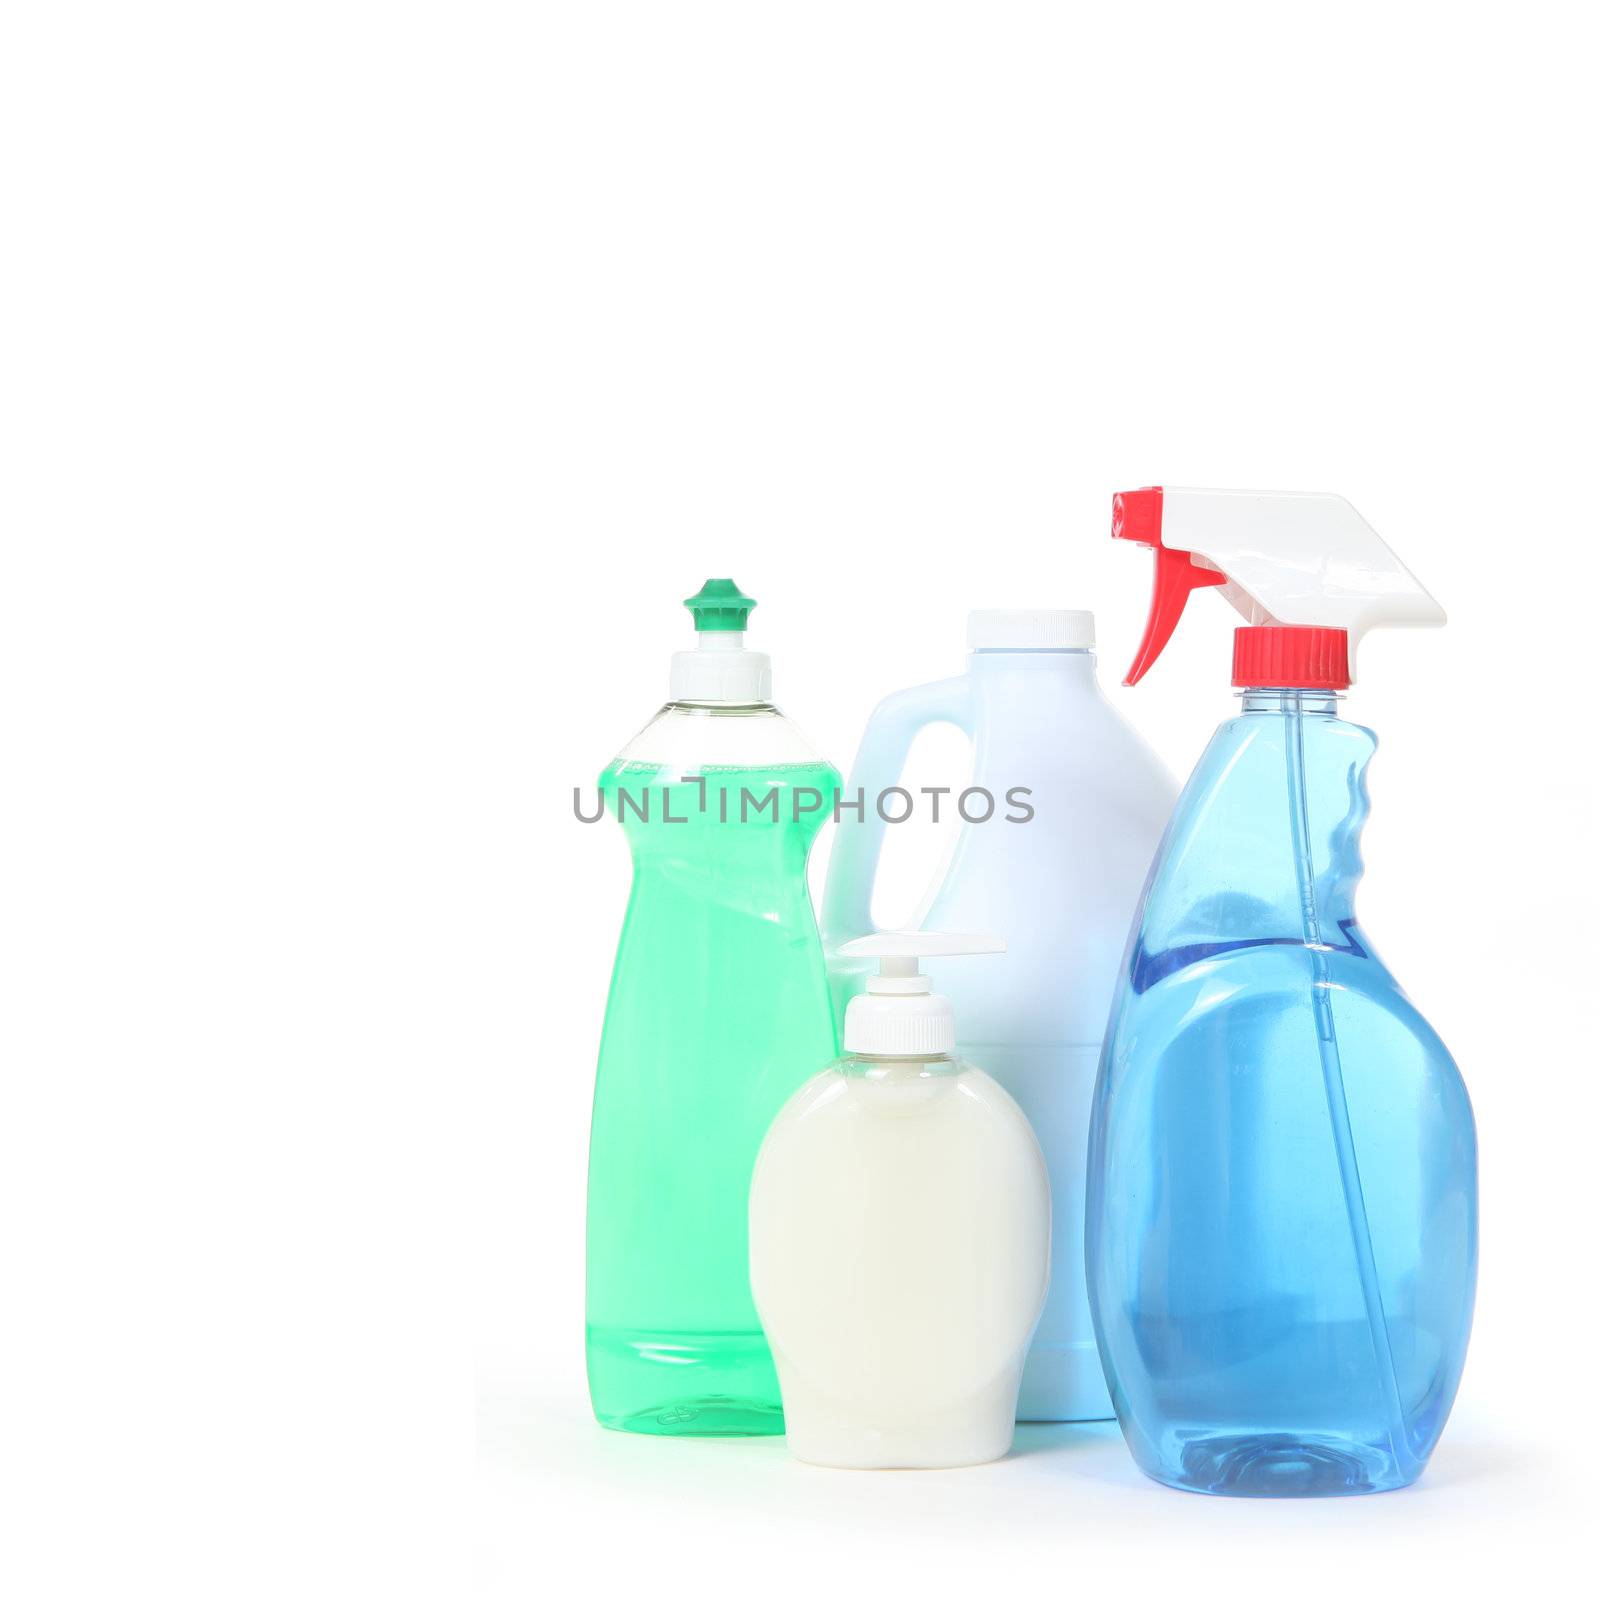 Household Cleaning Products Dishsoap Window Cleaner and Bleach on White Background